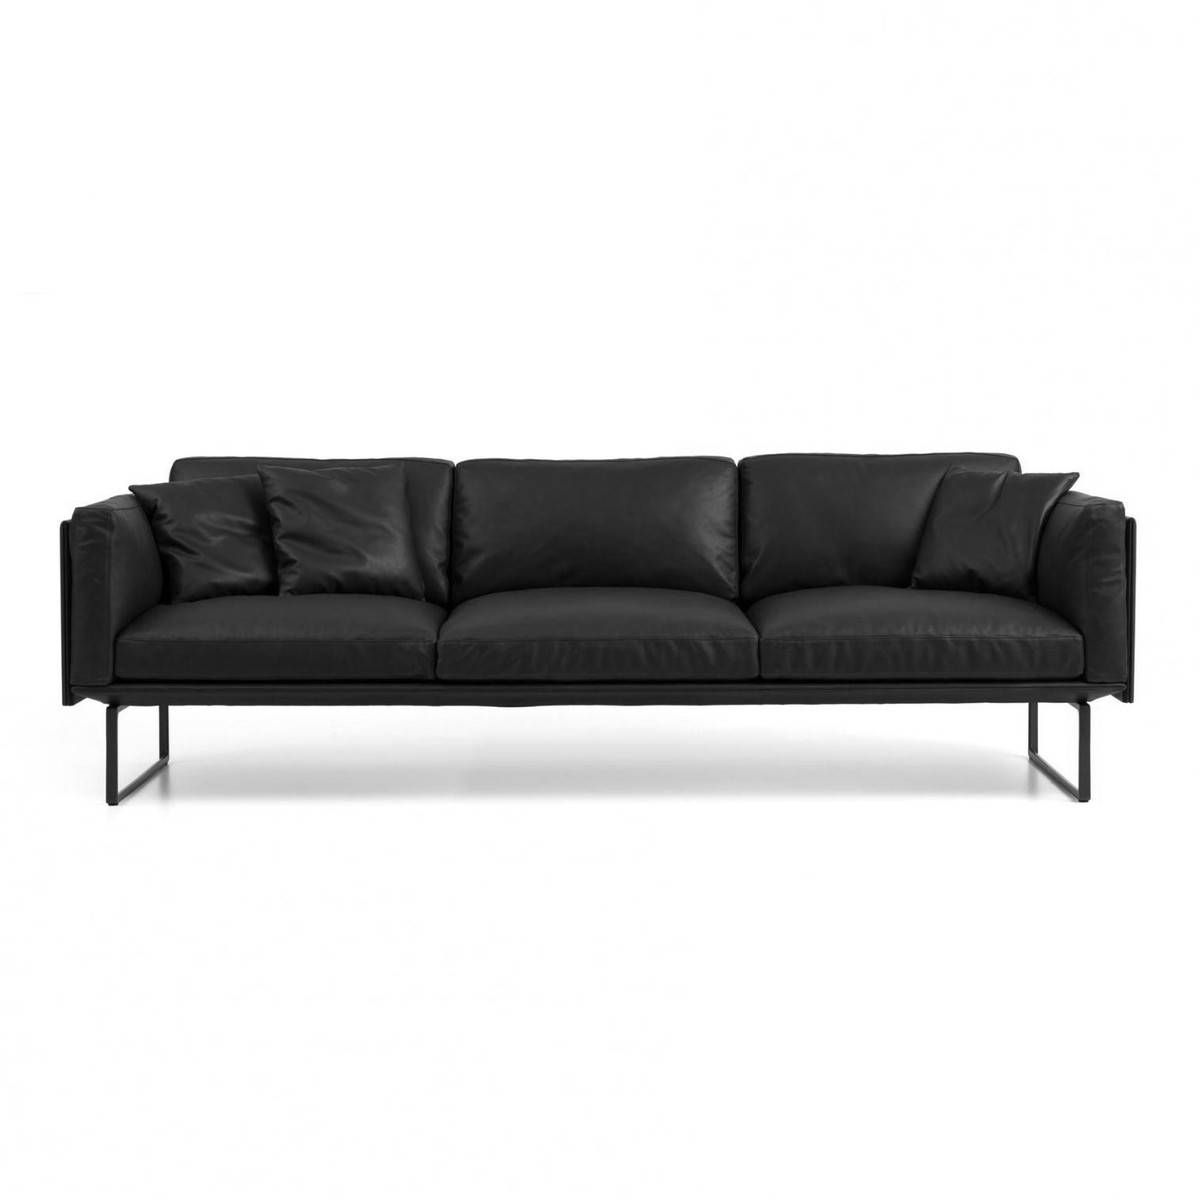 8 Piero Lissoni 3 Seater Leather Sofa | Cassina | Ambientedirect For 3 Seater Leather Sofas (View 17 of 30)